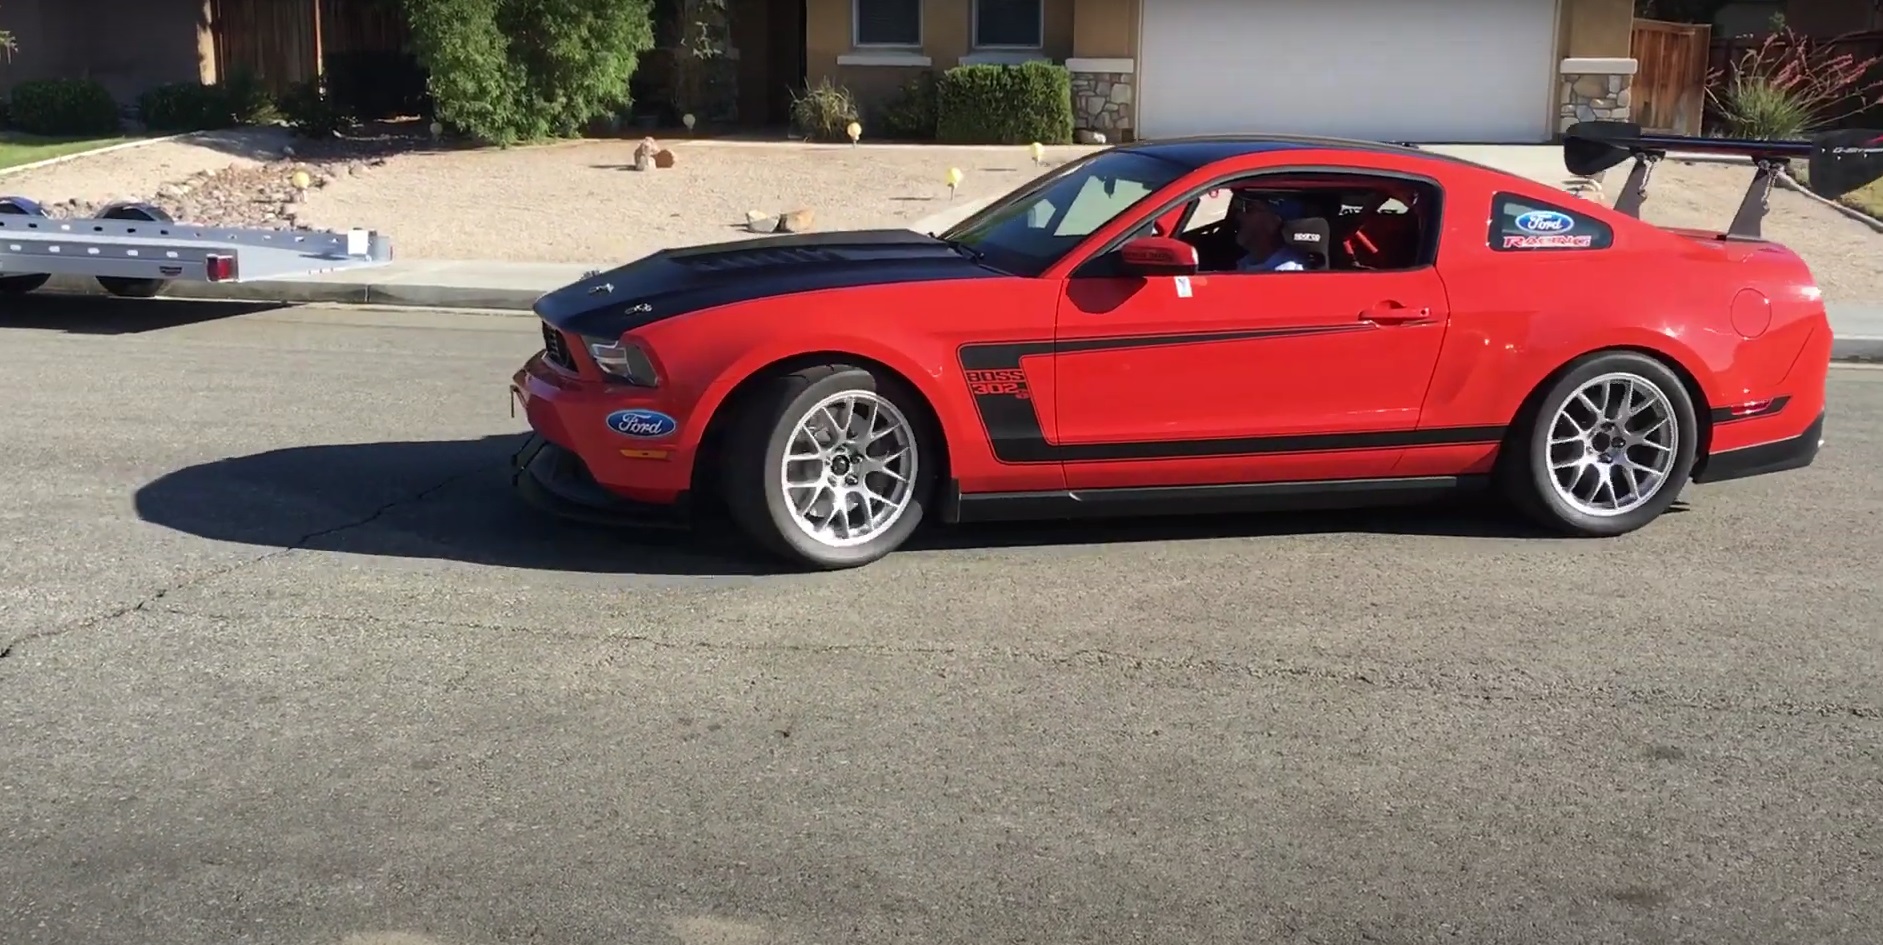 Video: Taking Out 2012 Ford Mustang Boss 302S For A Ride